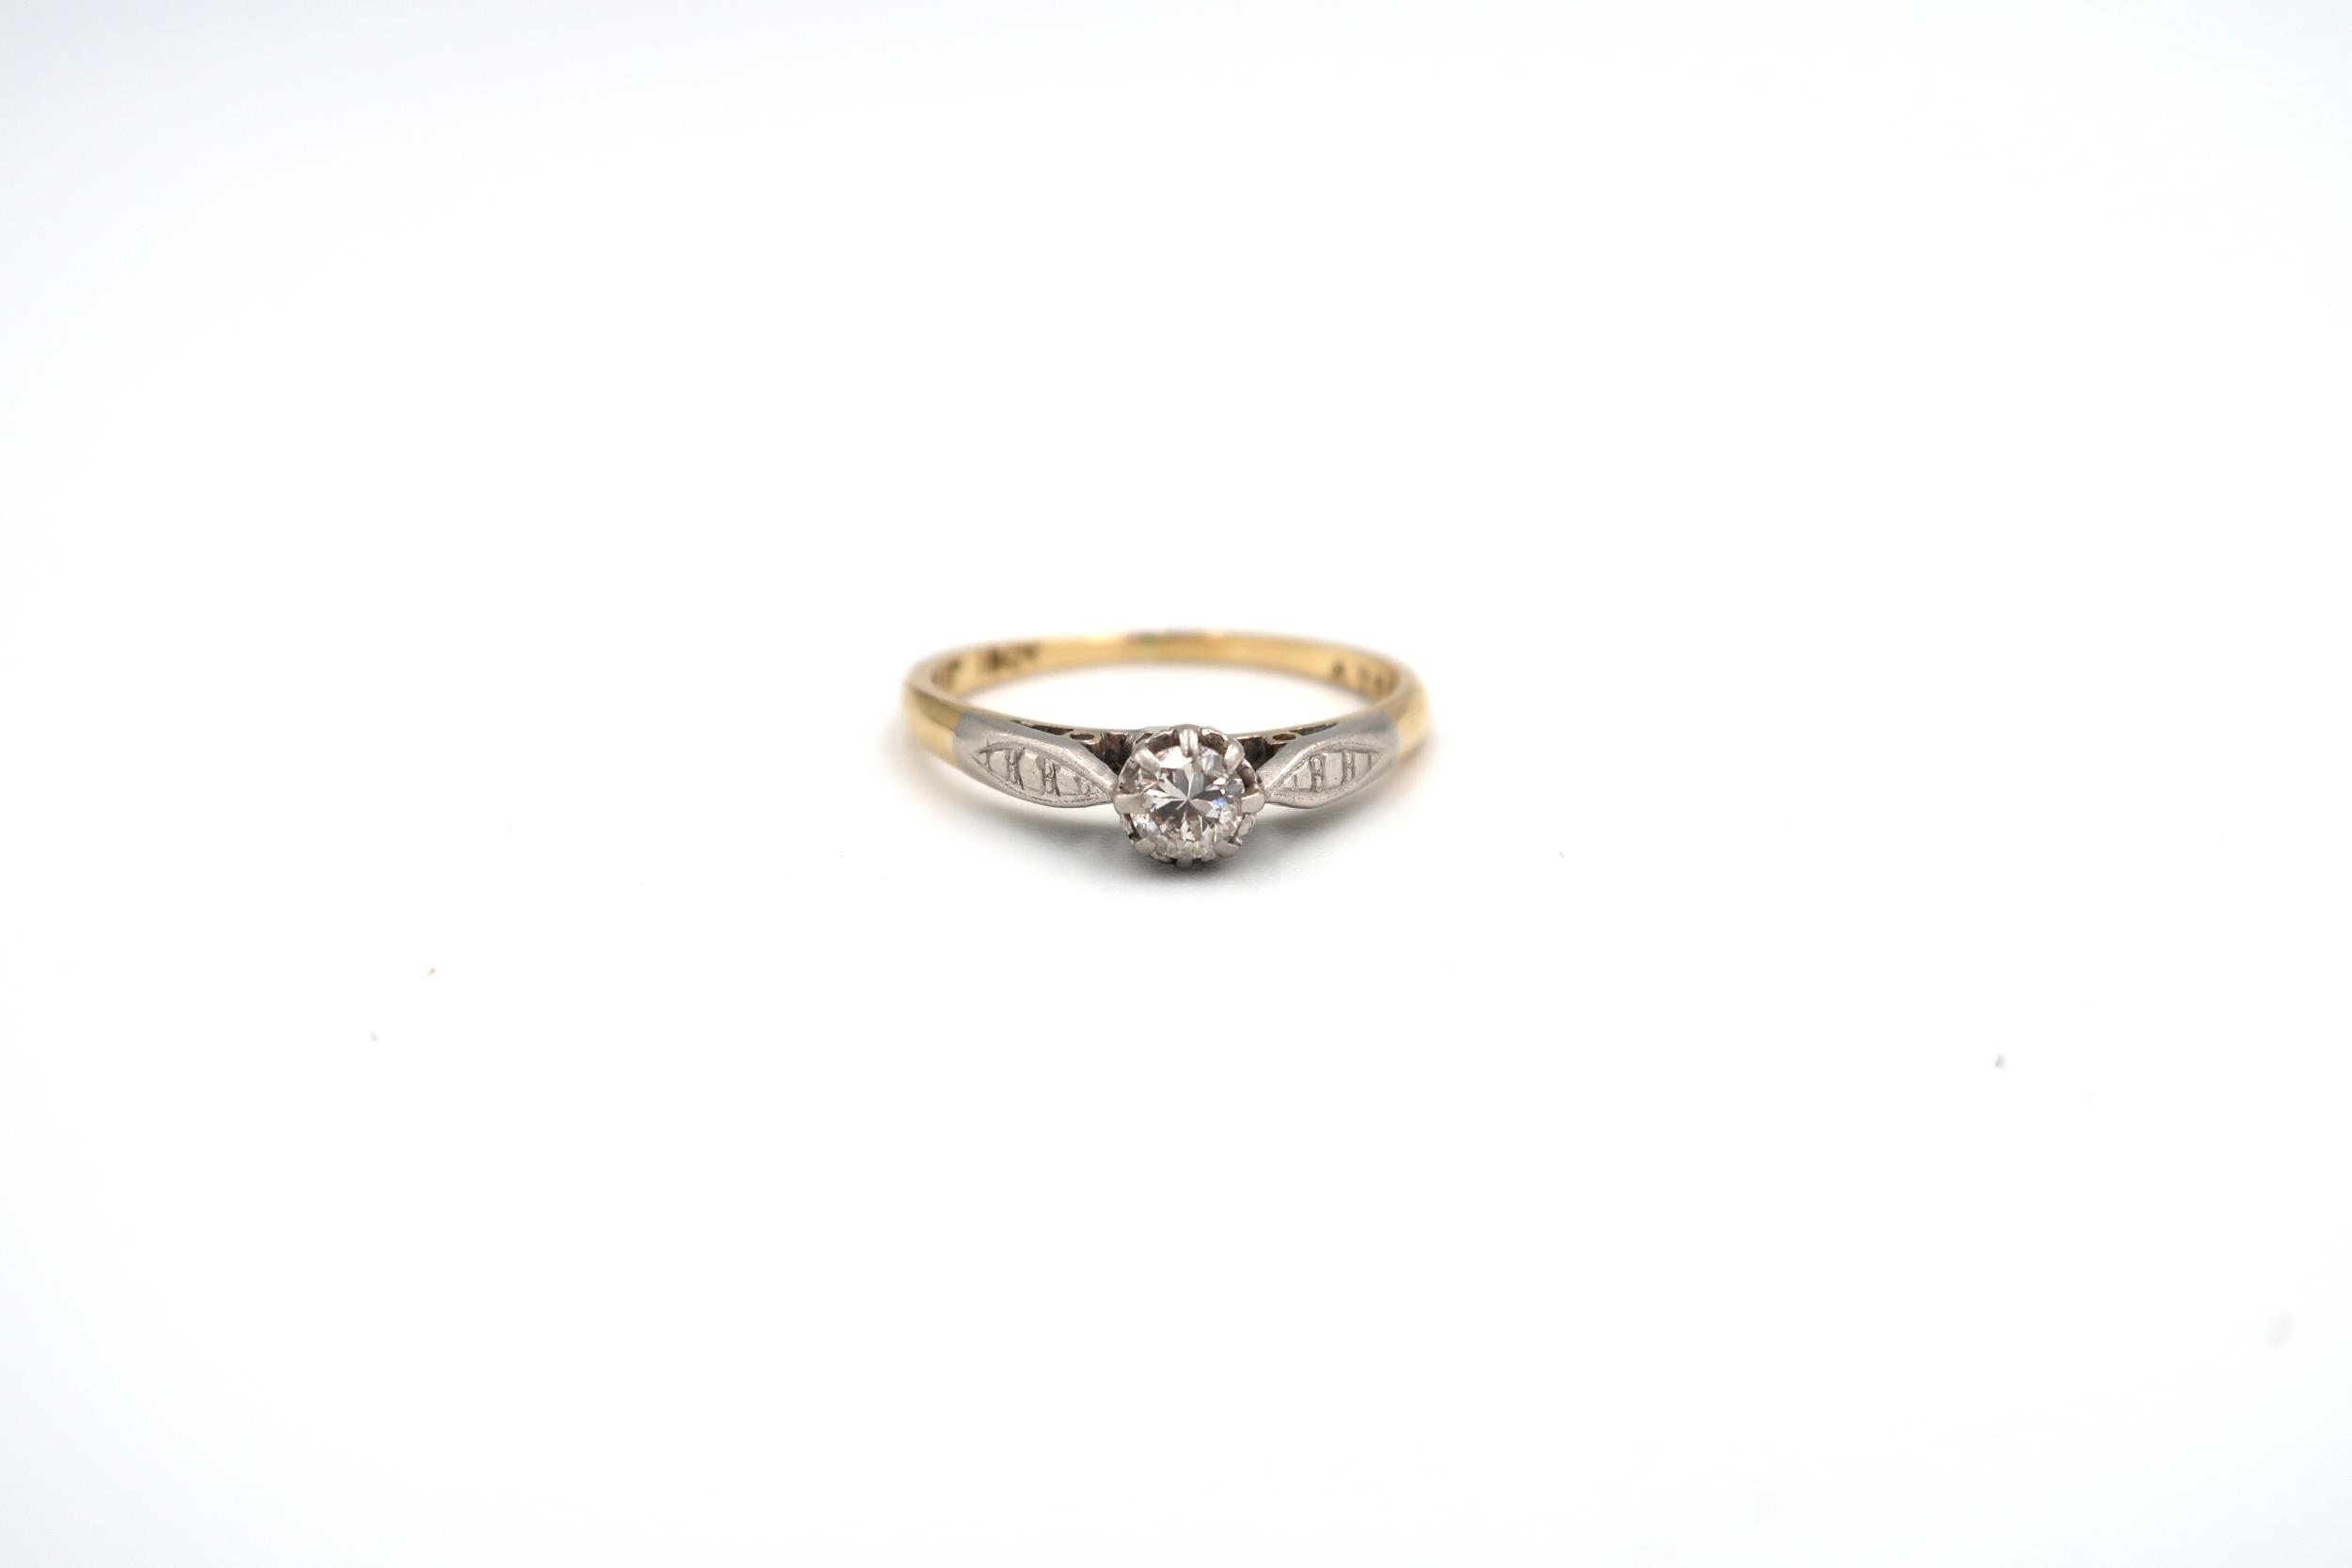 An 18ct gold and platinum ring with approx 0.15ct diamond to shoulder - approx weight 2.35 grams